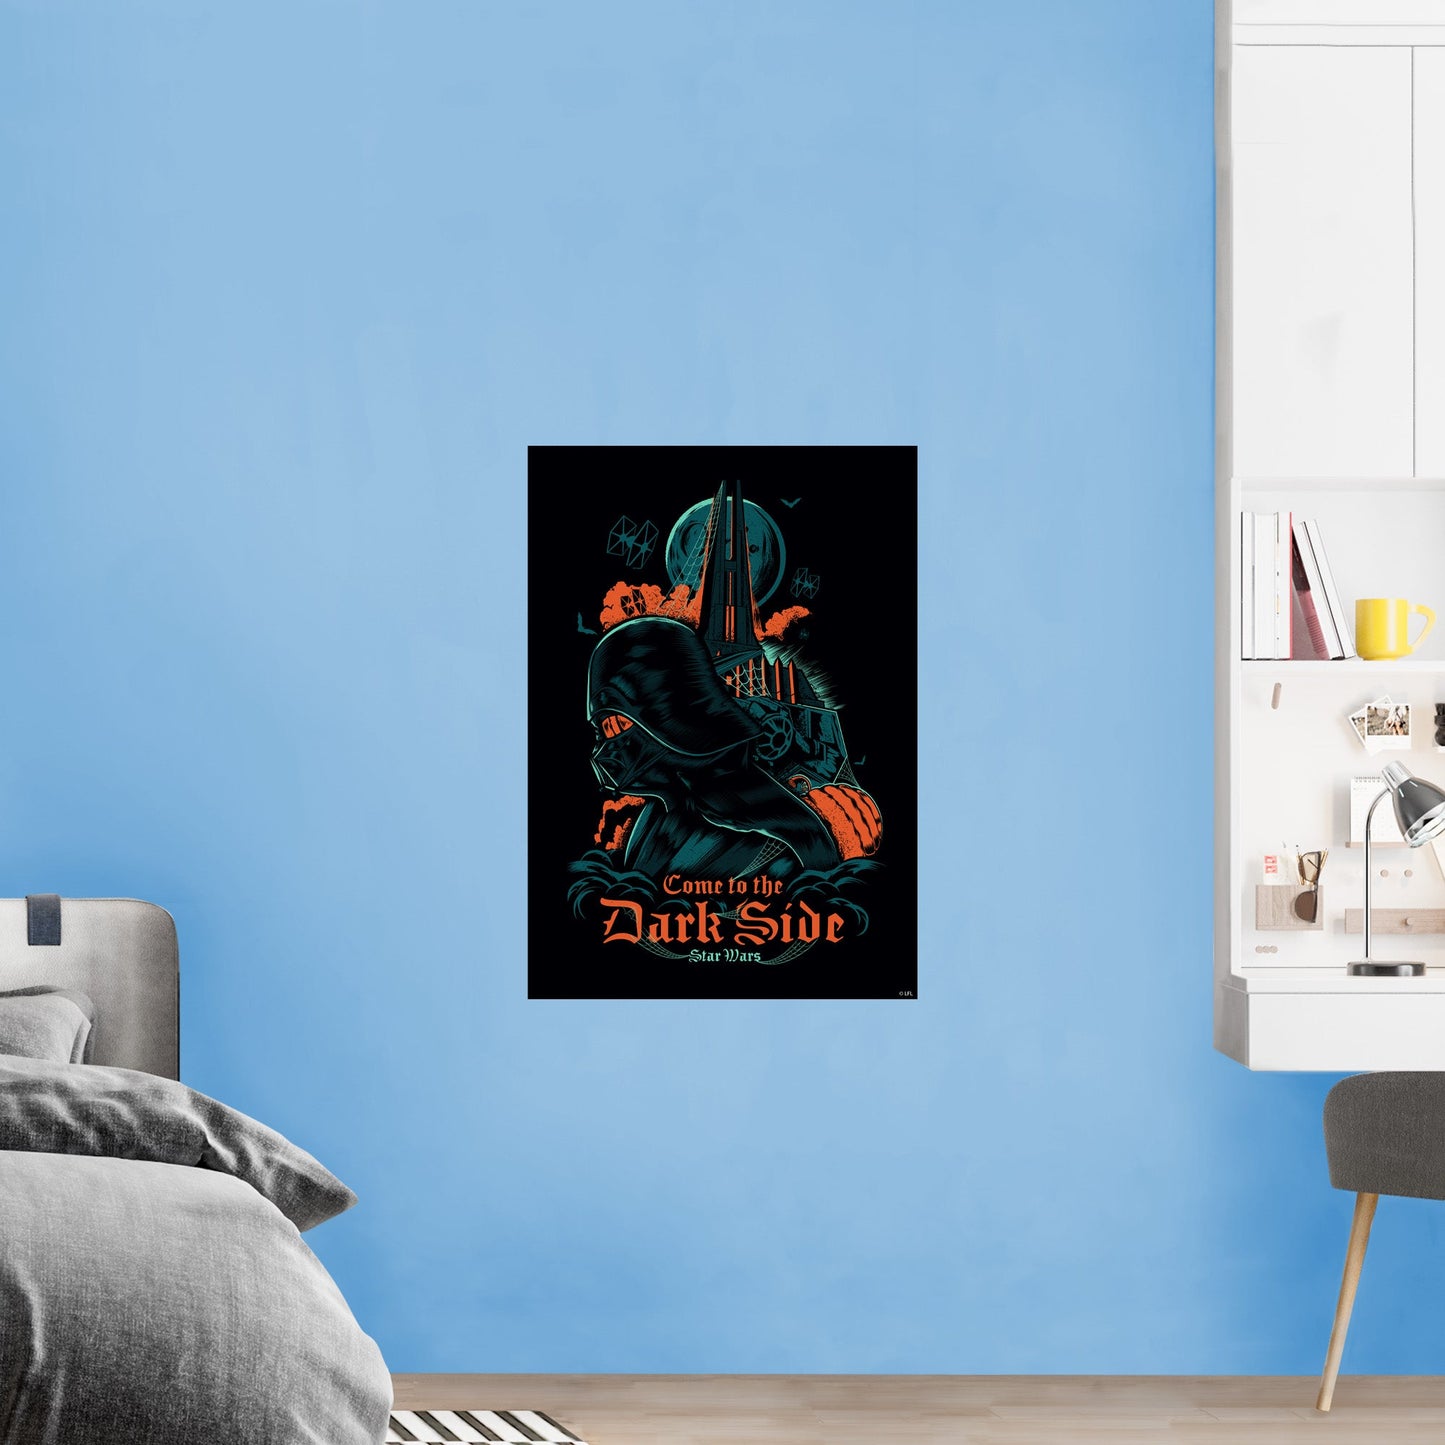 Come to the Dark Side Poster - Officially Licensed Star Wars Removable Adhesive Decal